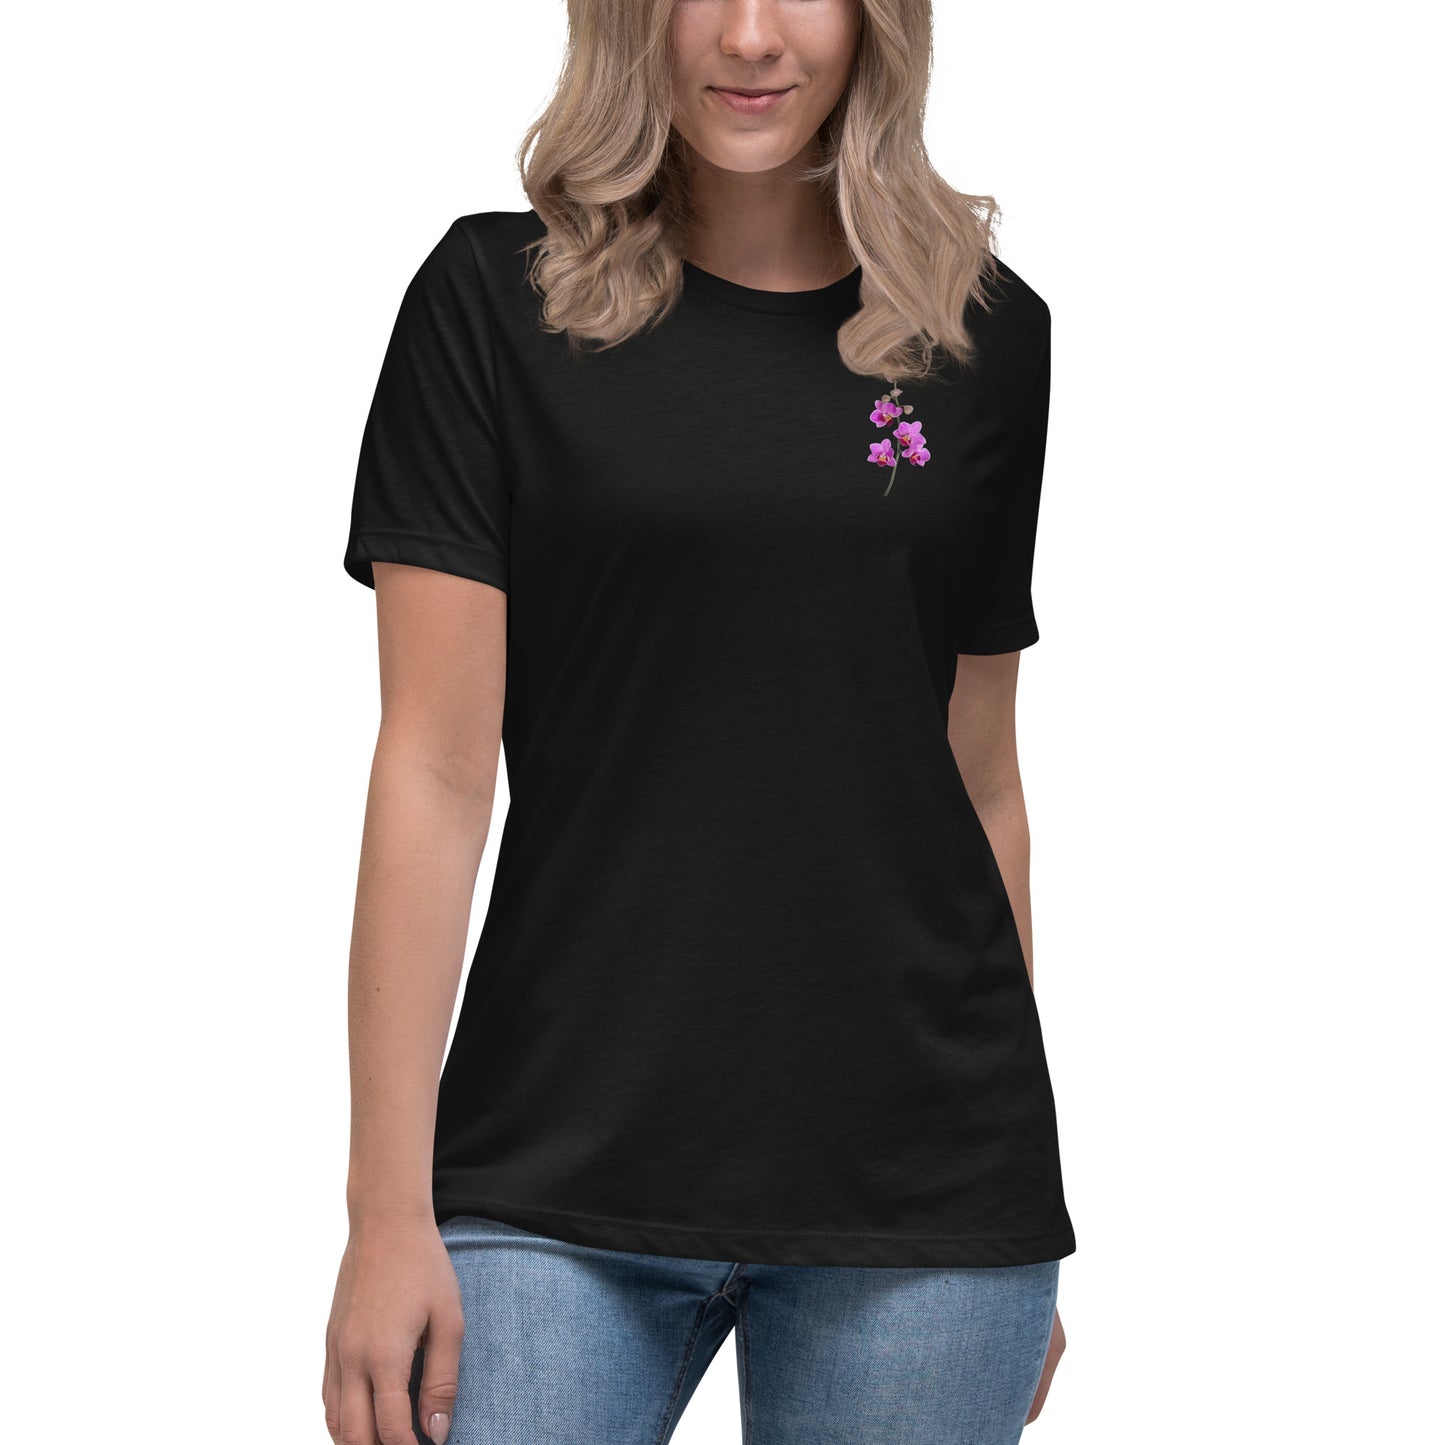 "Floral Printed Women's Relaxed T-Shirt: Ultimate Softness & Comfort"